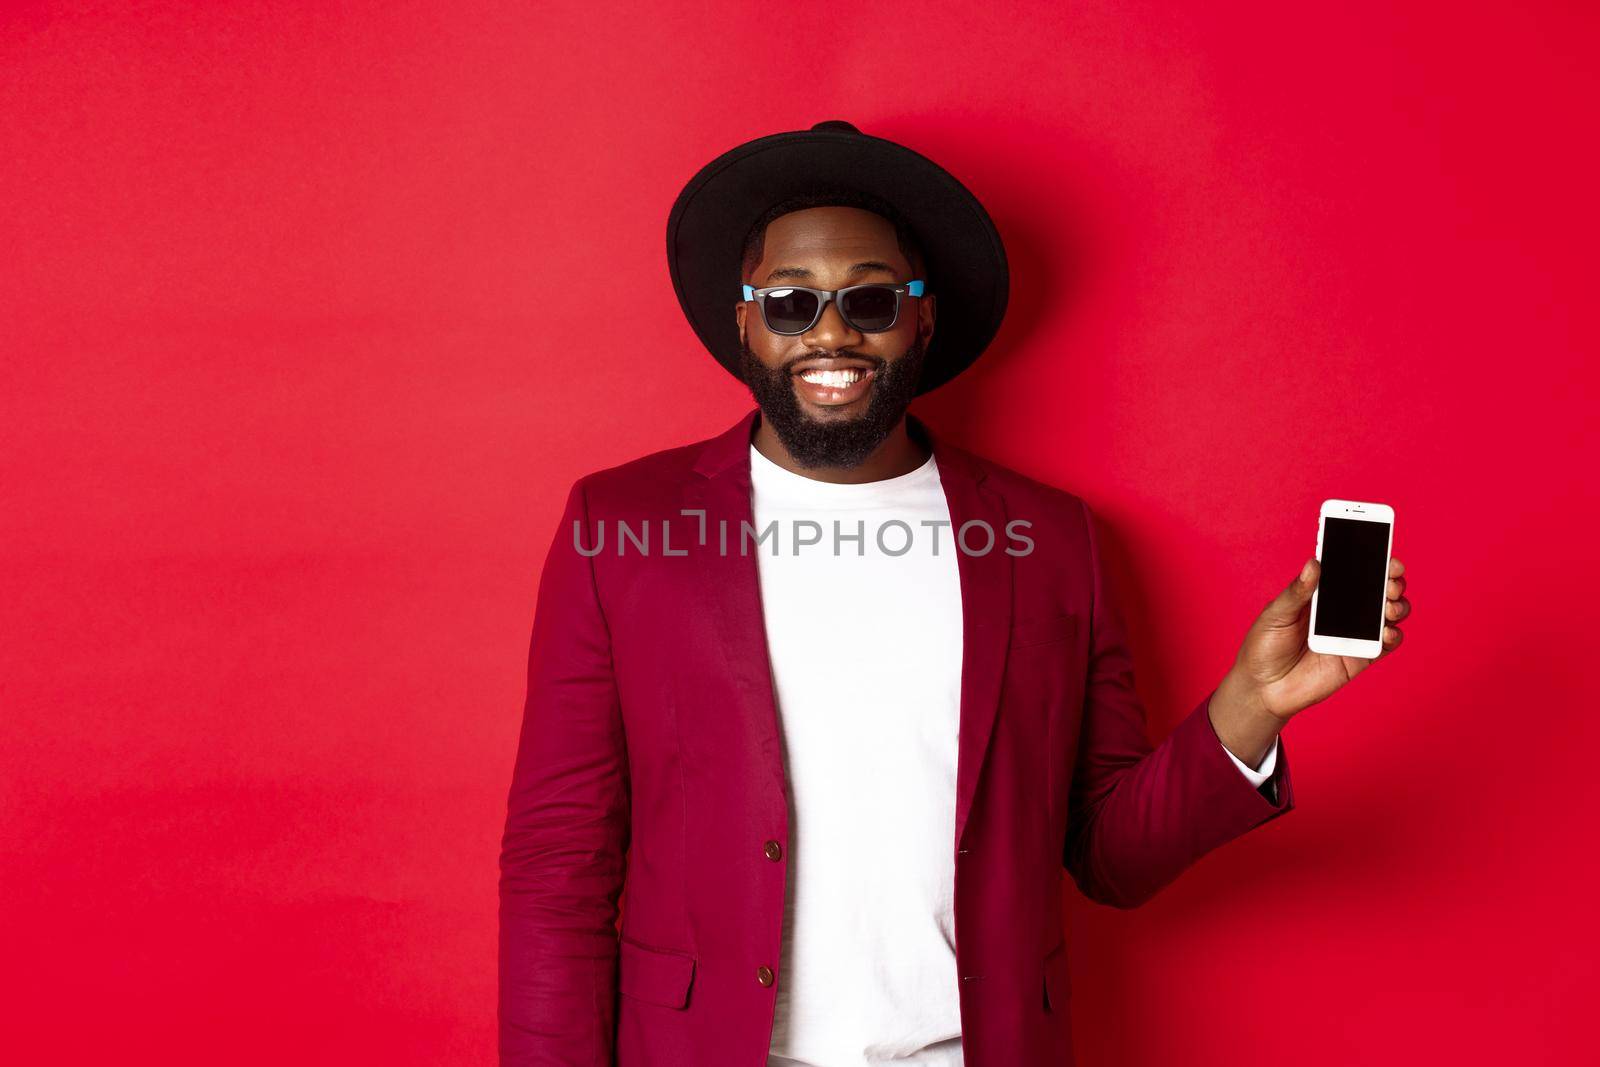 Handsome and stylish Black man showing phone screen at camera, recommending online store or application, standing over red background.